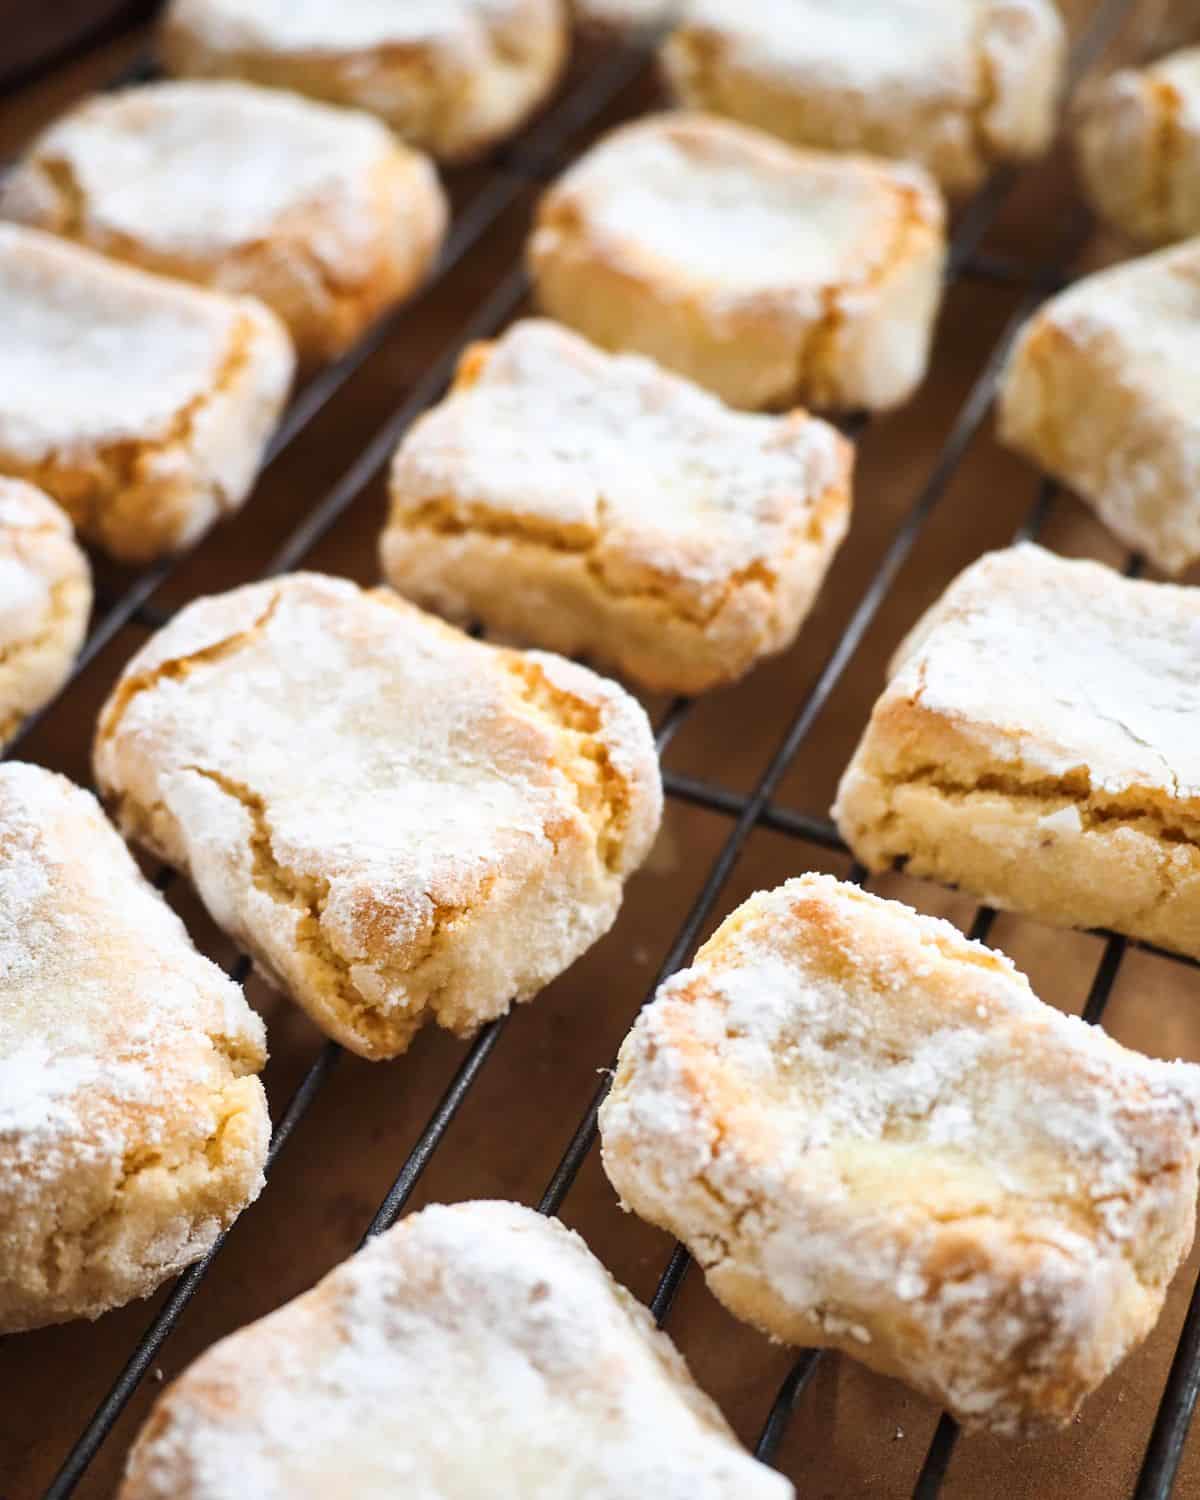 Crunchy Italian Almond Biscuits on a resting grid.